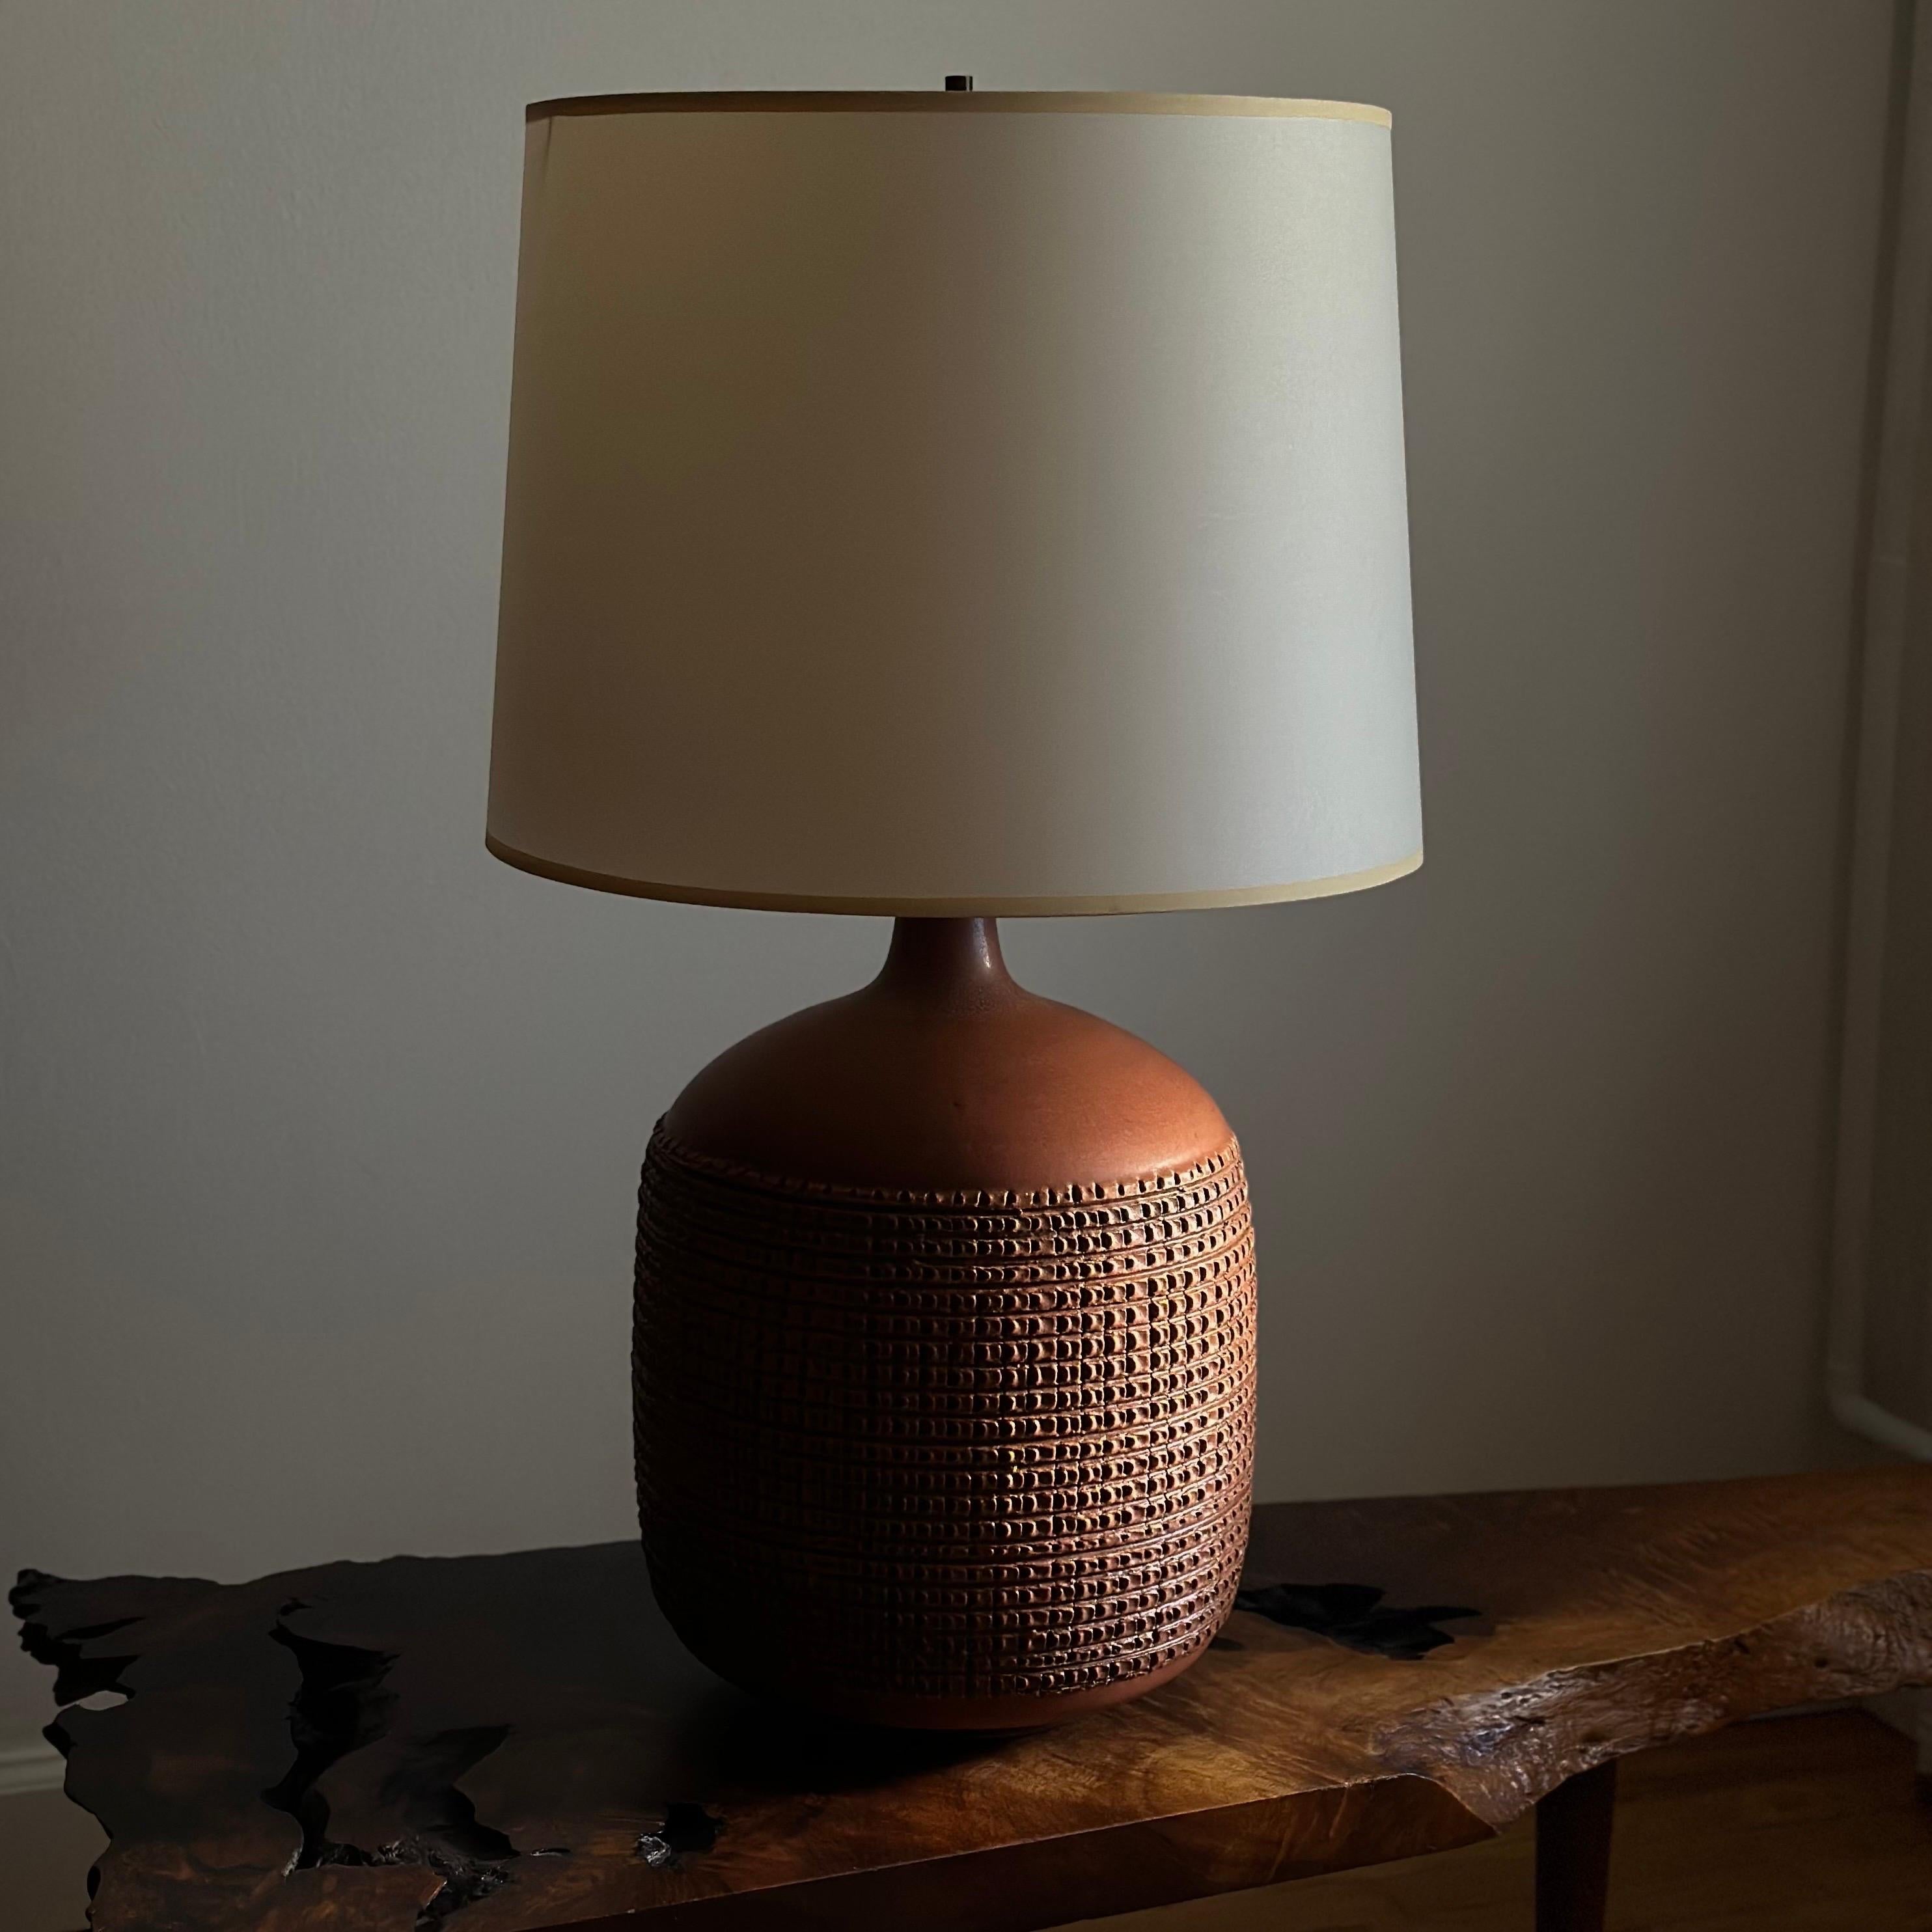 Hand thrown ceramic table lamp with a deeply incised crosshatch pattern designed by Lee Rosen for Design Technics. Signed to the rear with the 